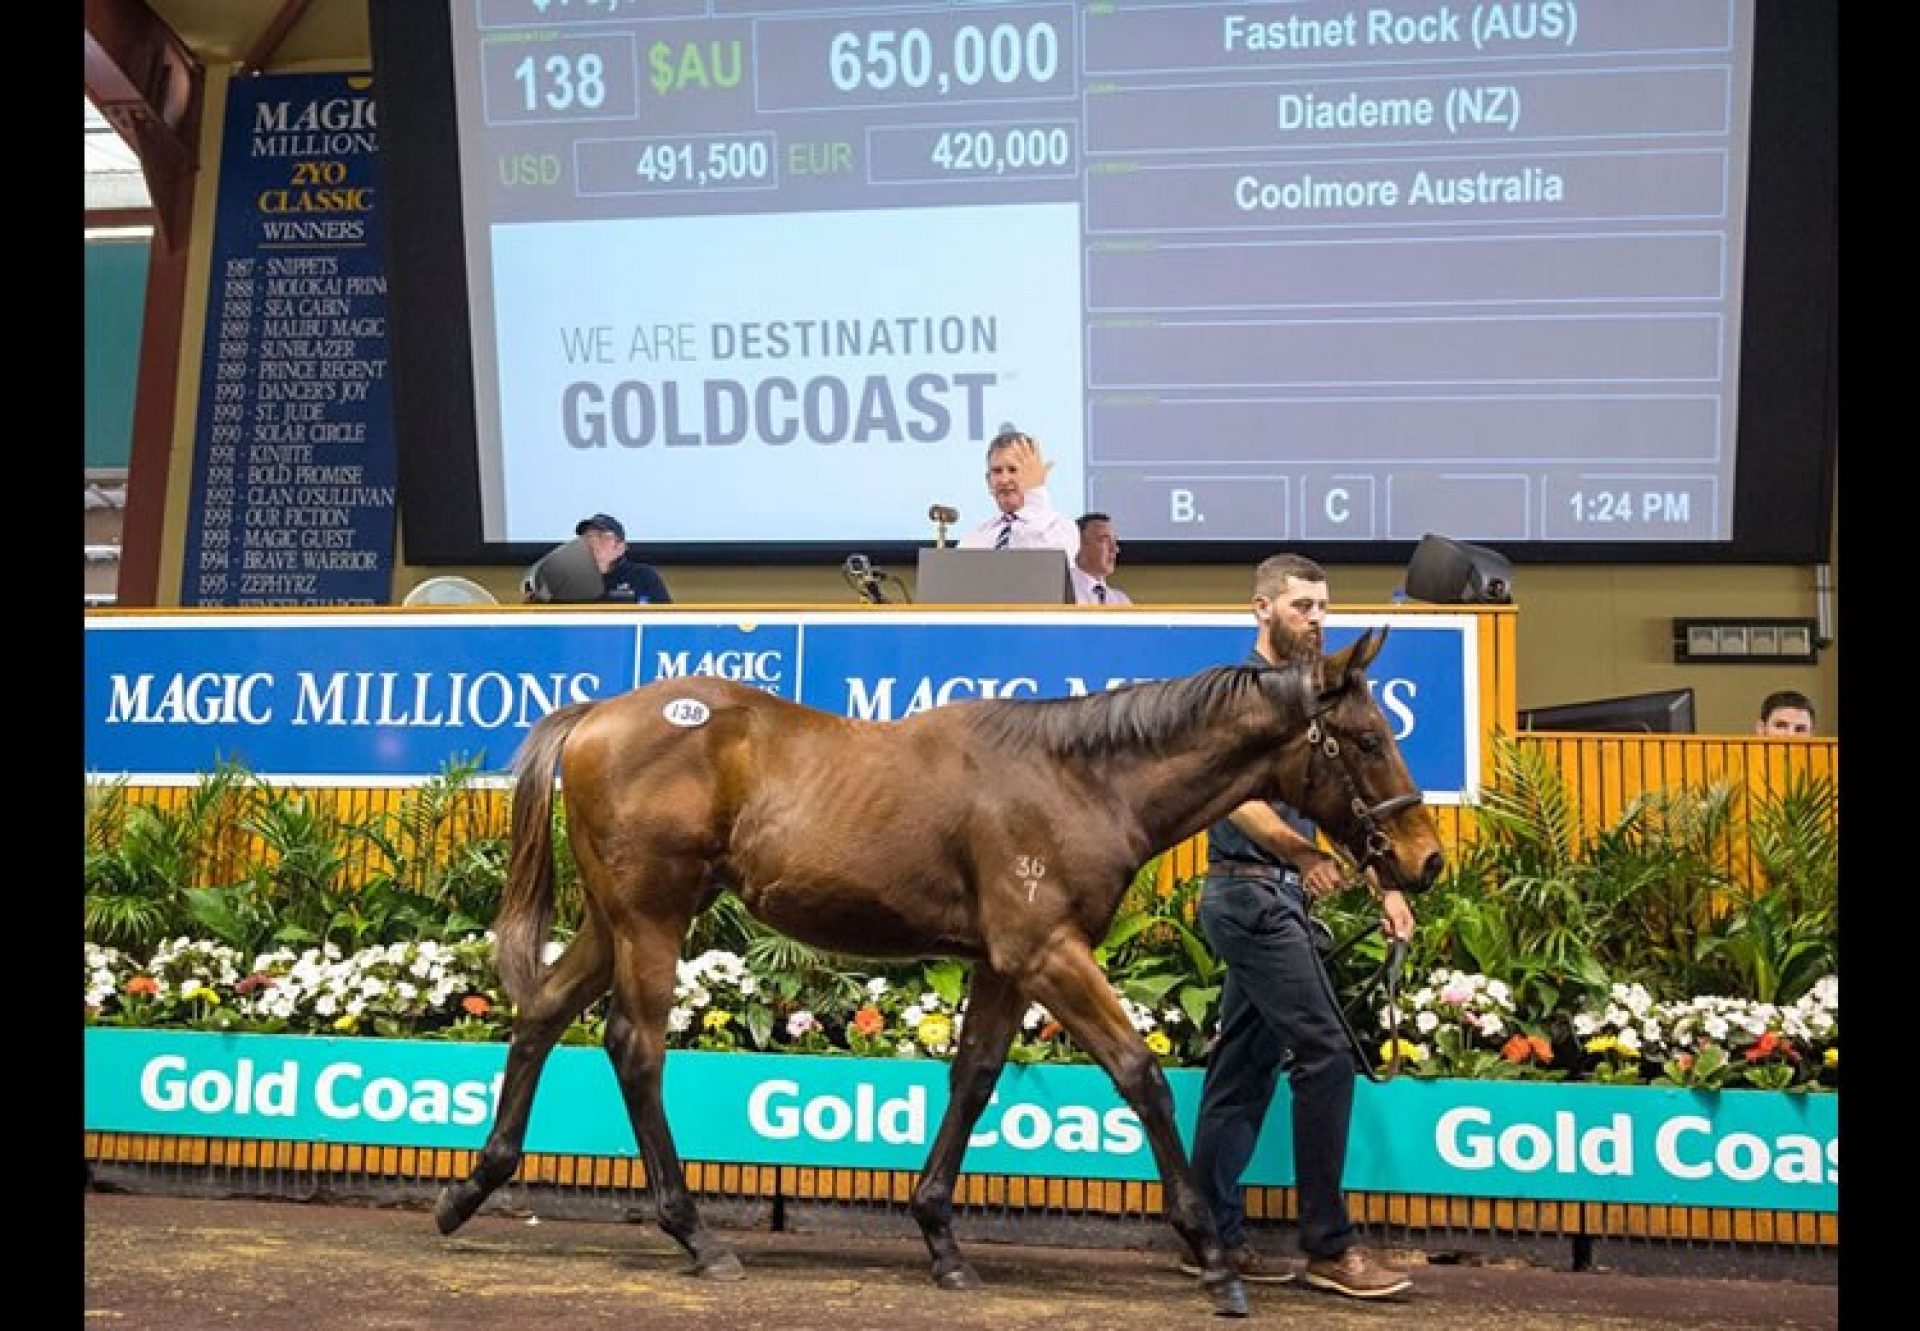 Fastnet Rock ex Diademe colt selling for $650,000 at the Magic Millions Weanling Sale